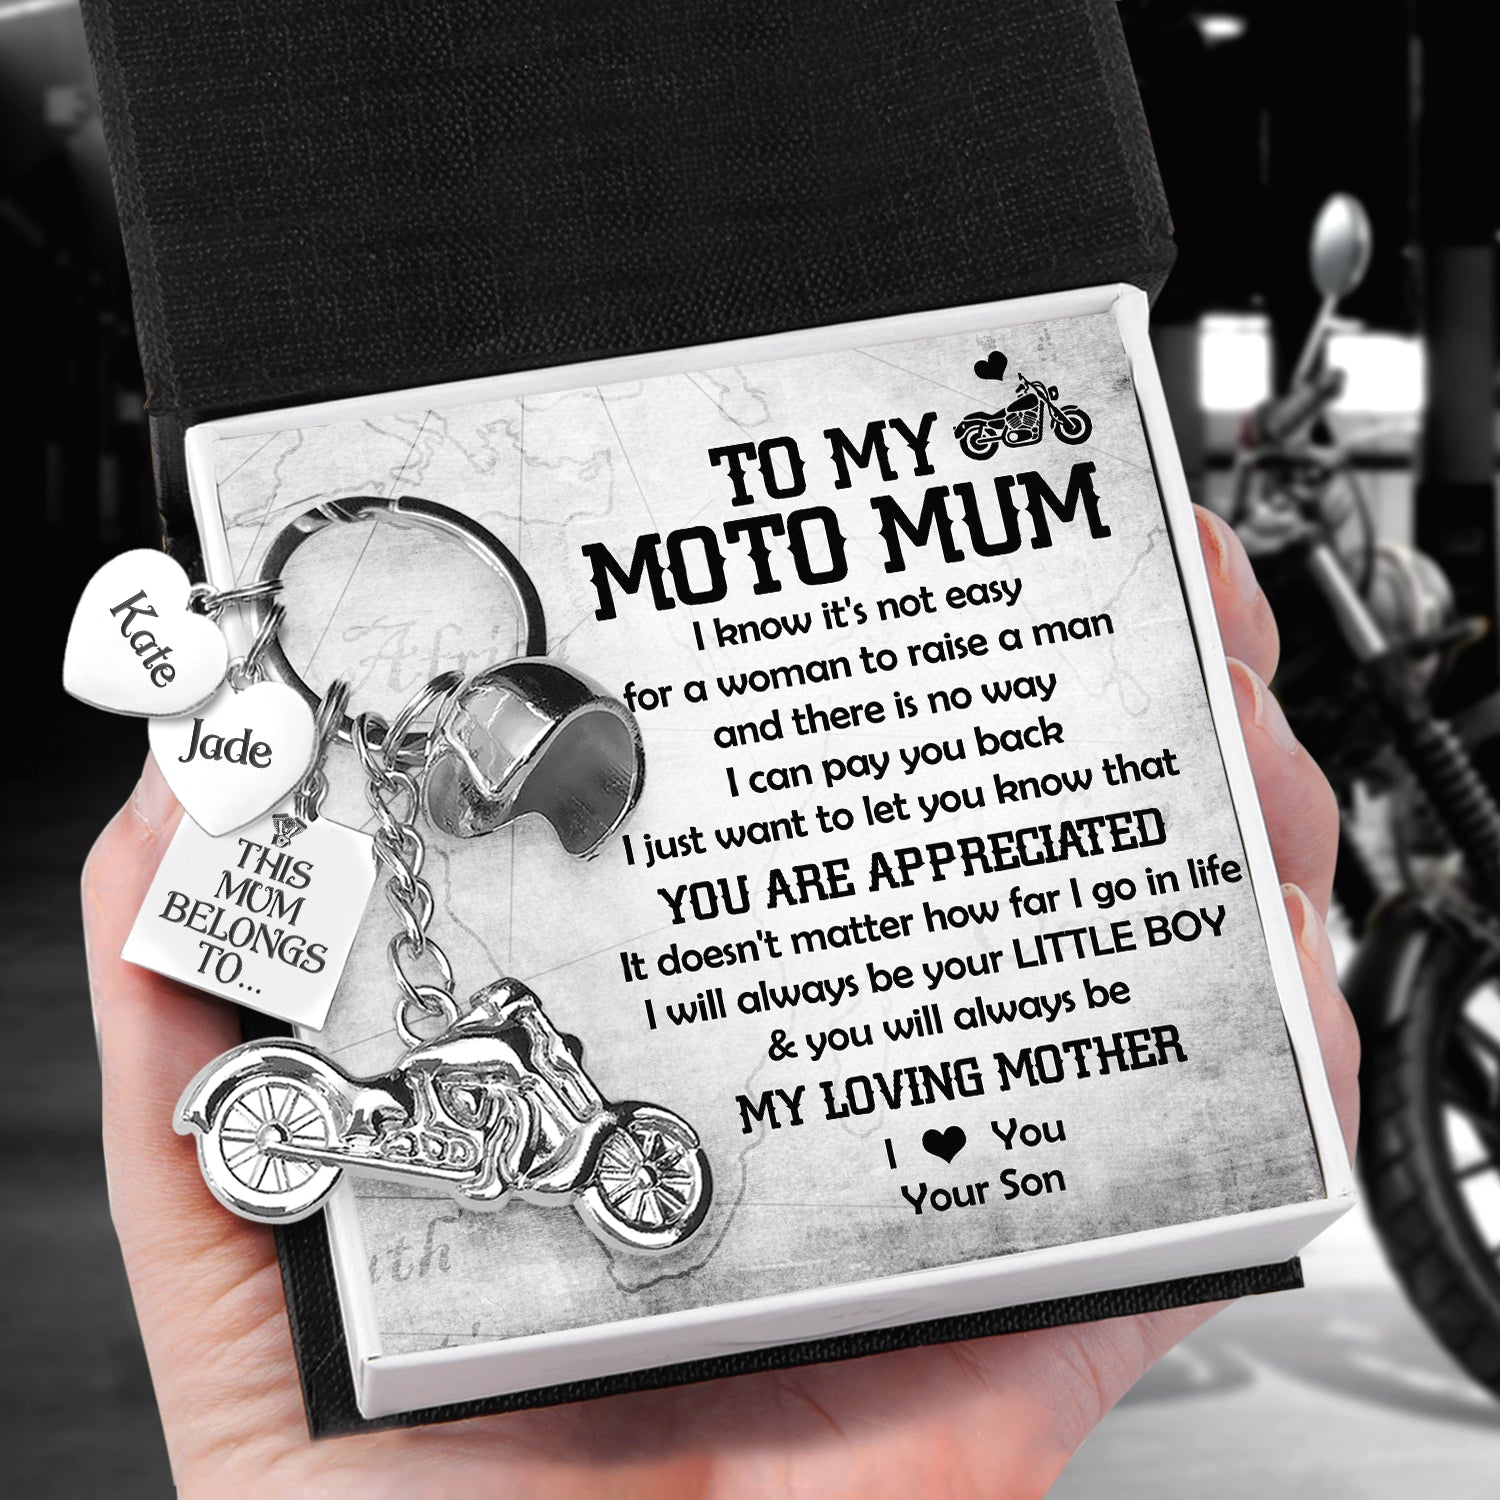 Personalised Classic Bike Keychain - Biker - To My Moto Mum - From Son - You Will Always Be My Loving Mother - Ukgkt19001